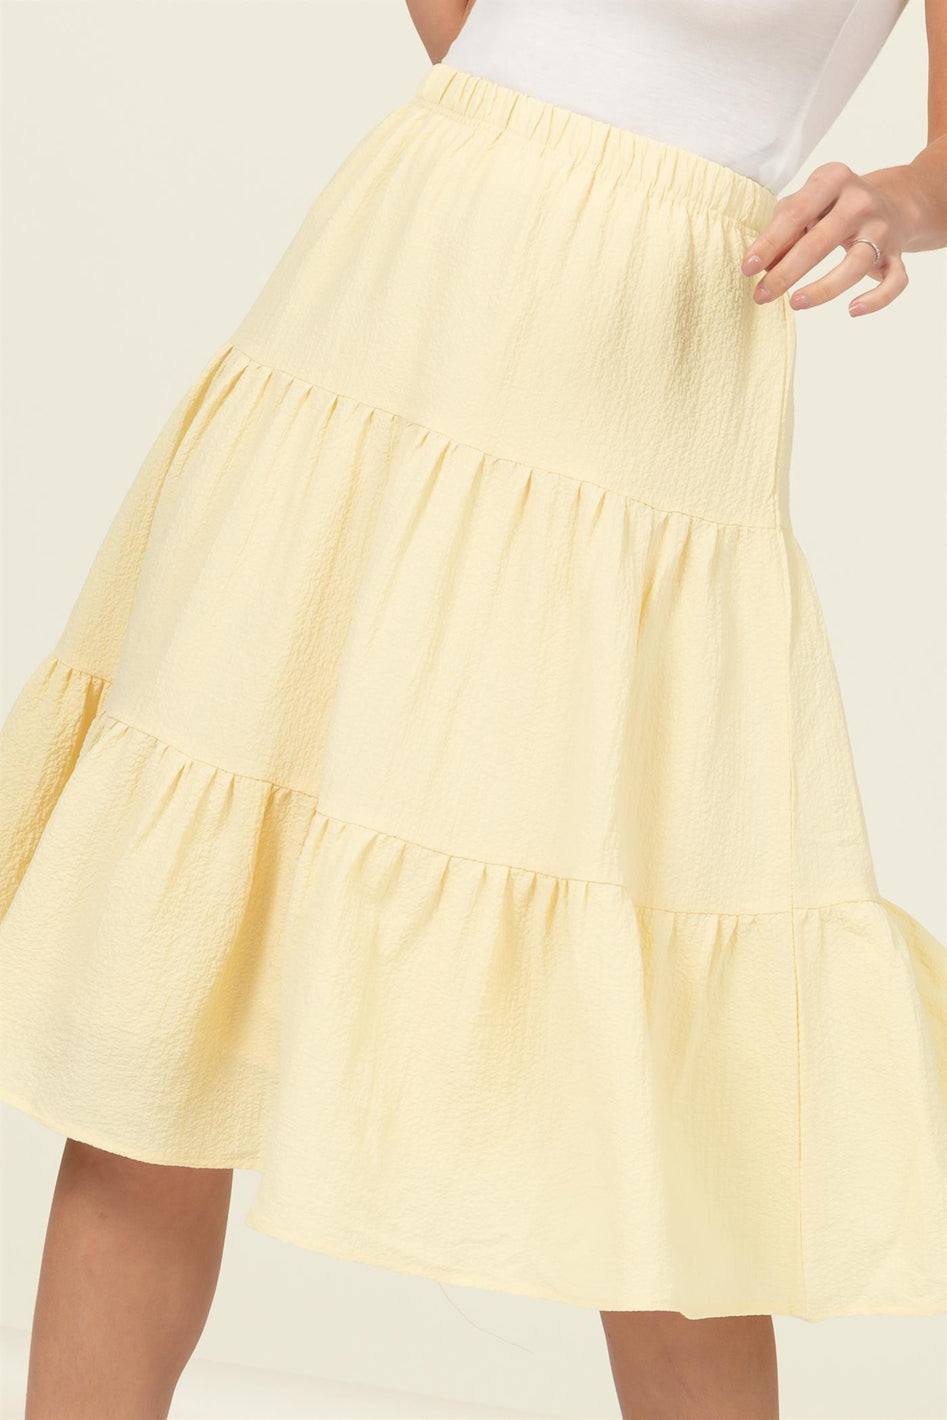 Call It a Day Tiered Midi Skirt - Azoroh